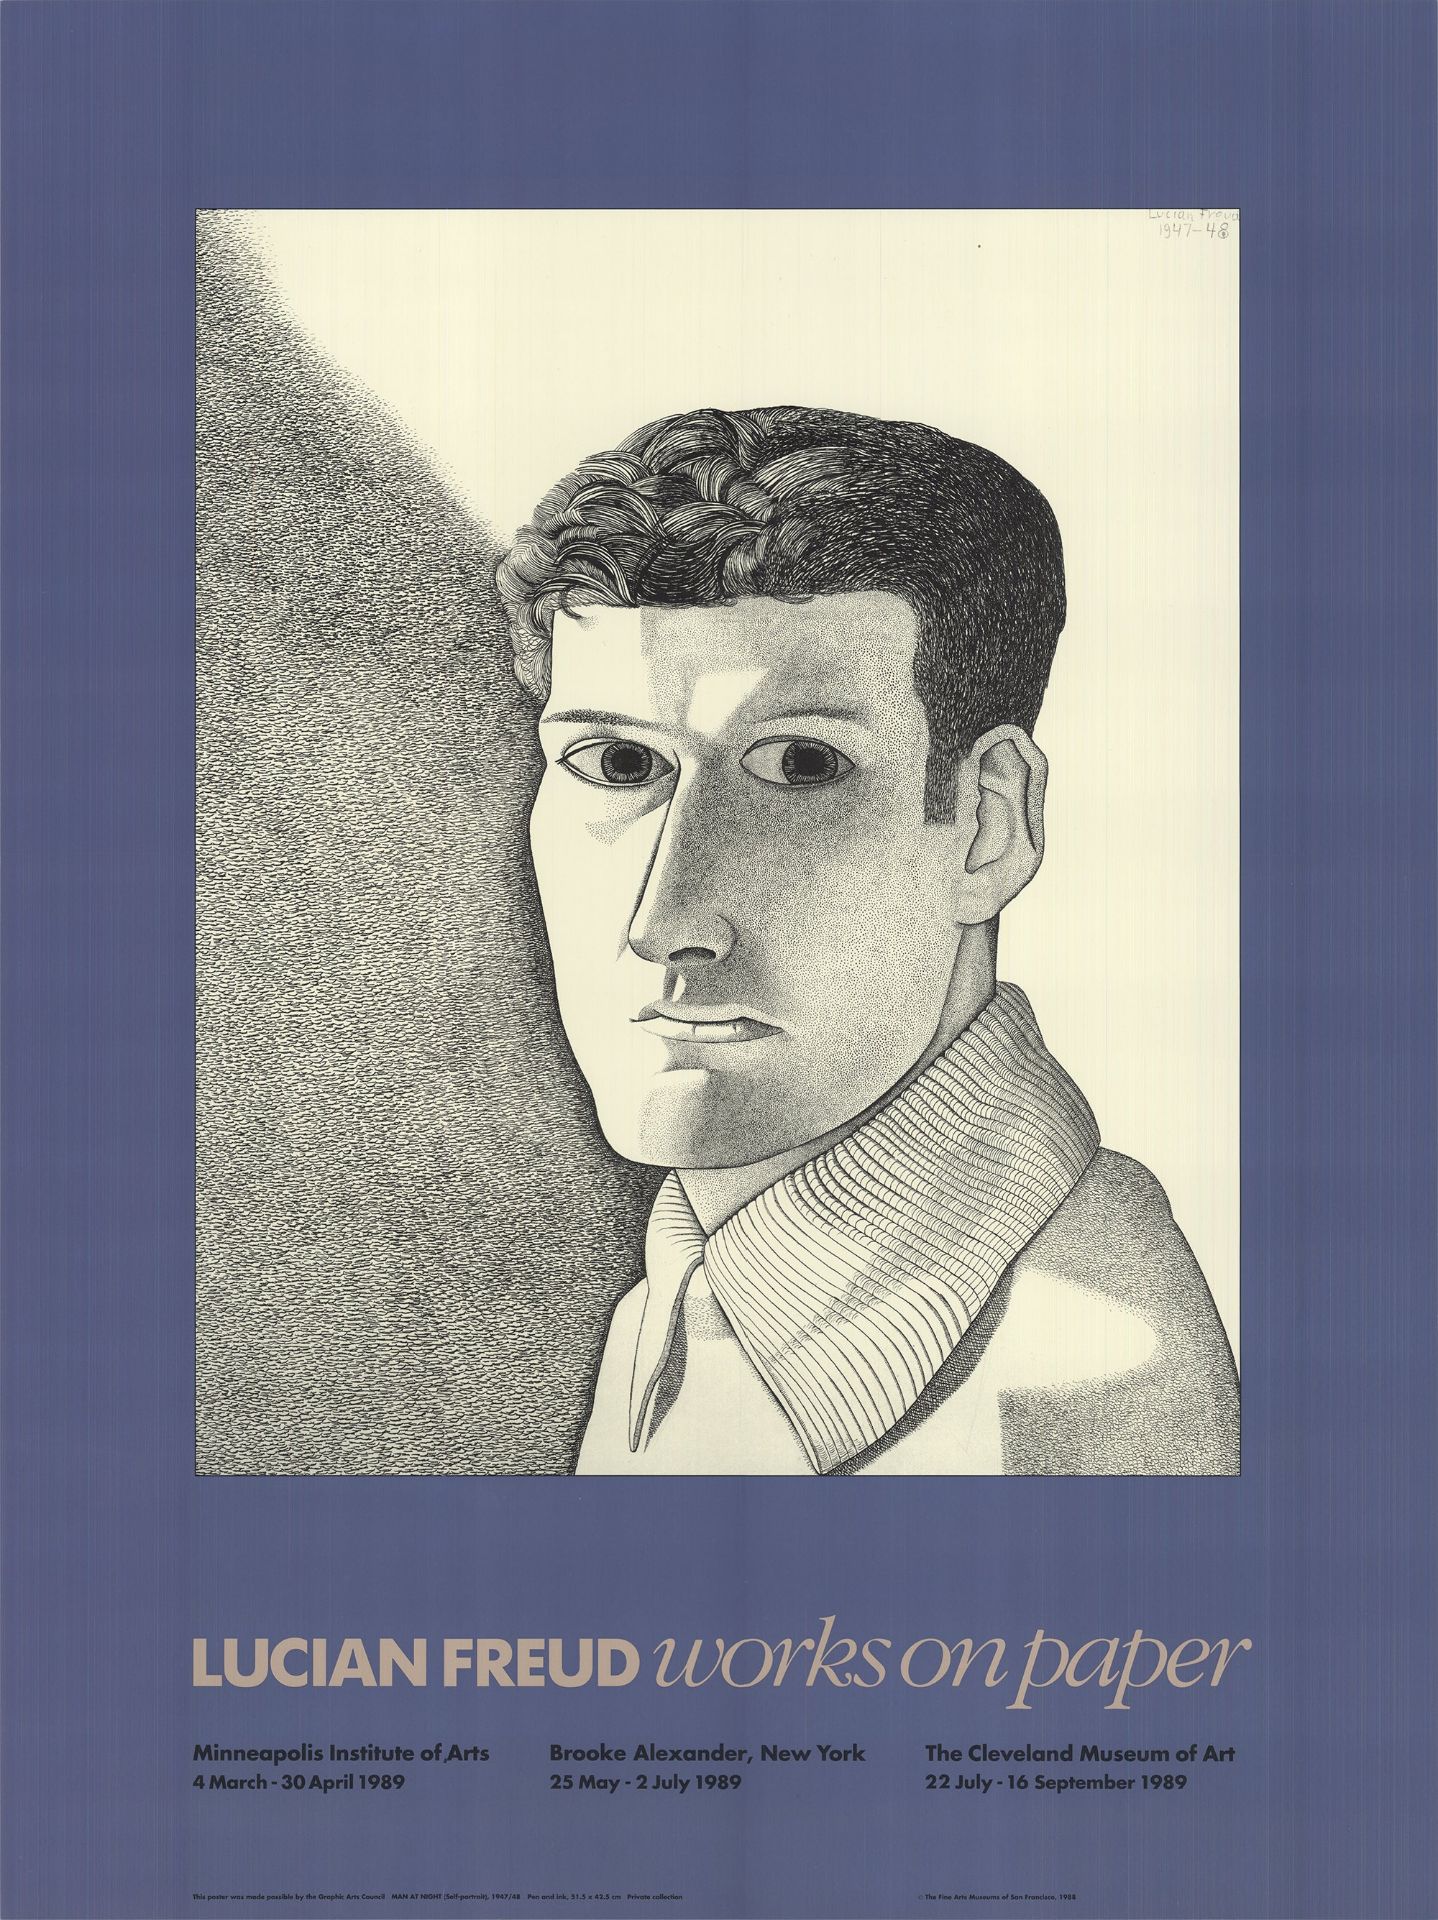 LUCIEN FREUD - MAN AT NIGHT - SELF PORTRAIT - EXHIBITION POSTER